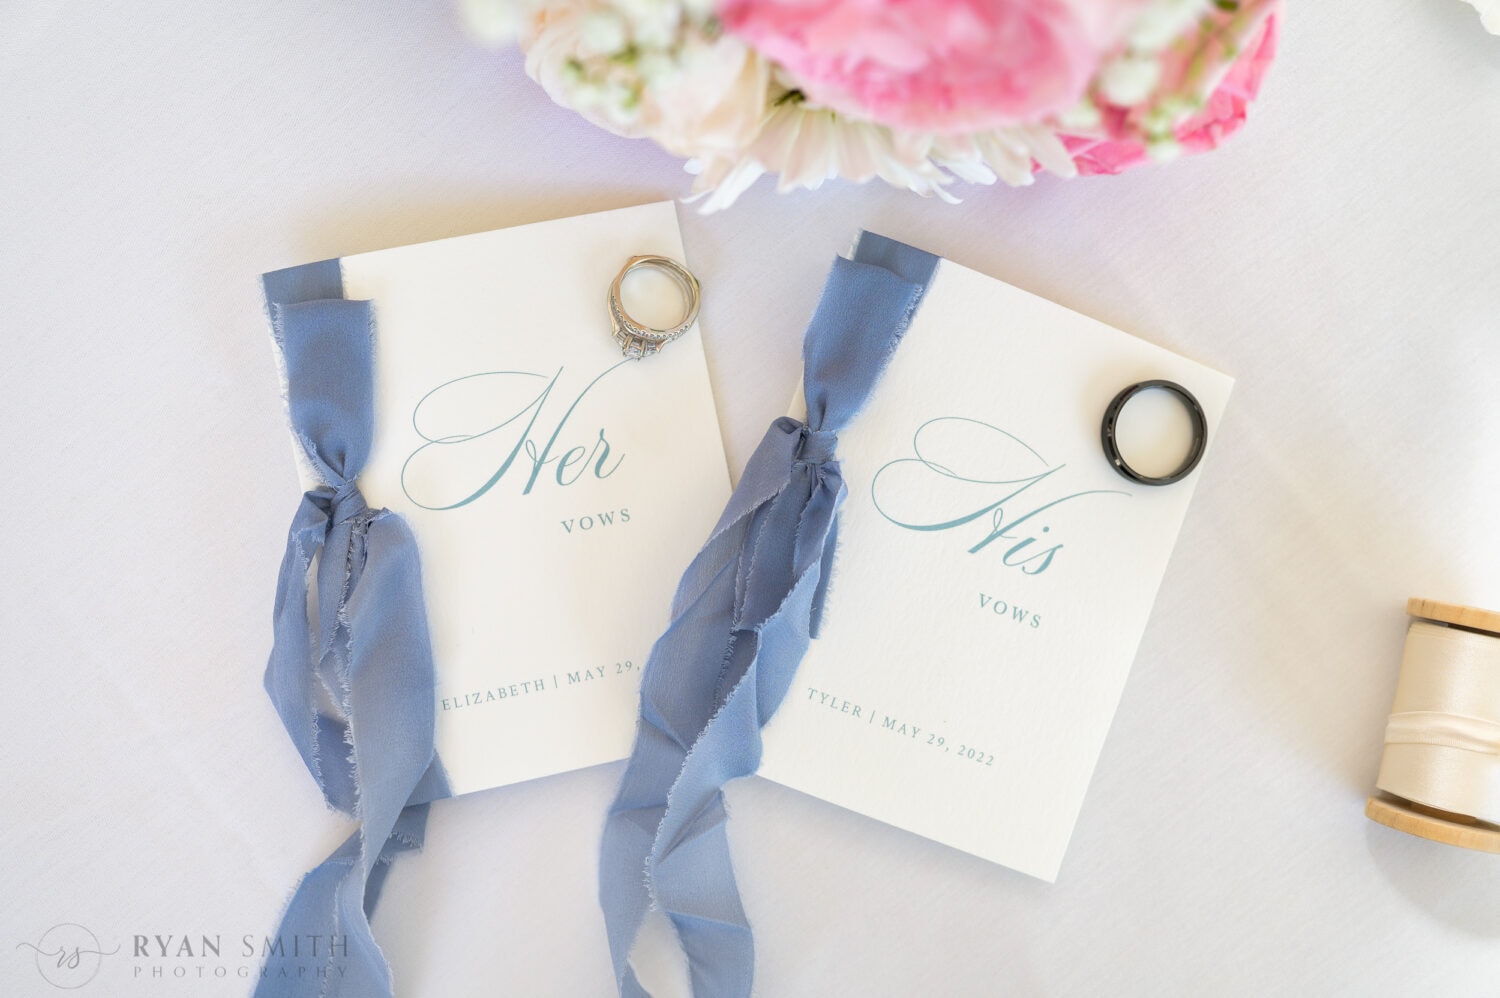 Pictures of wedding details with rings and invitation - Pawleys Plantation